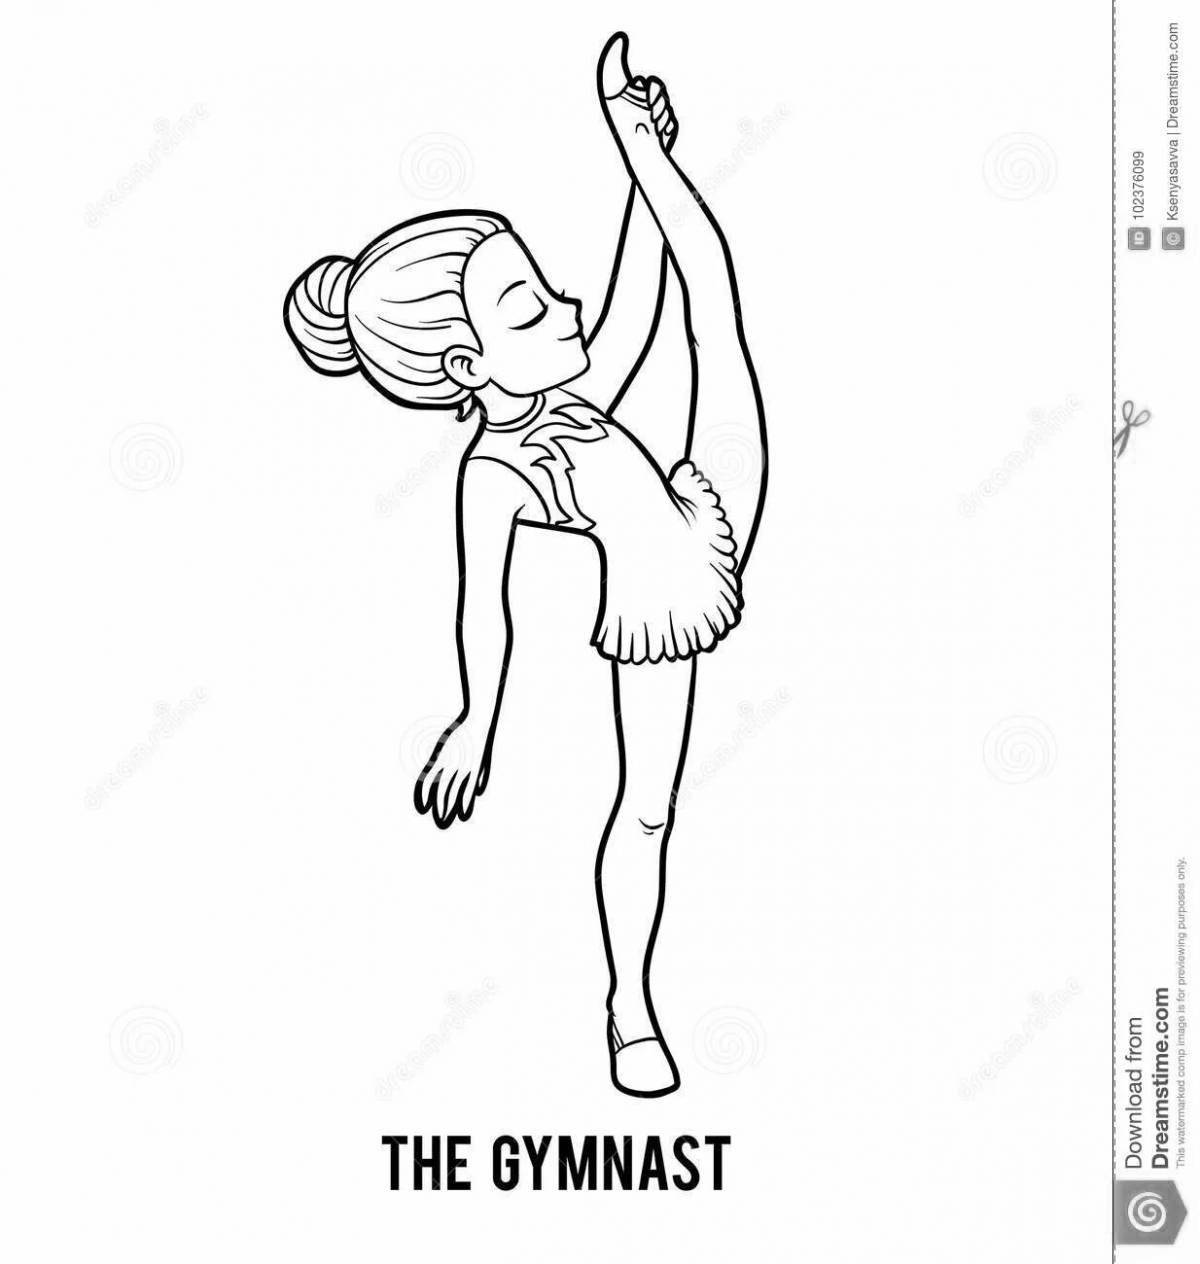 Outstanding Gymnast Coloring Page for Kids